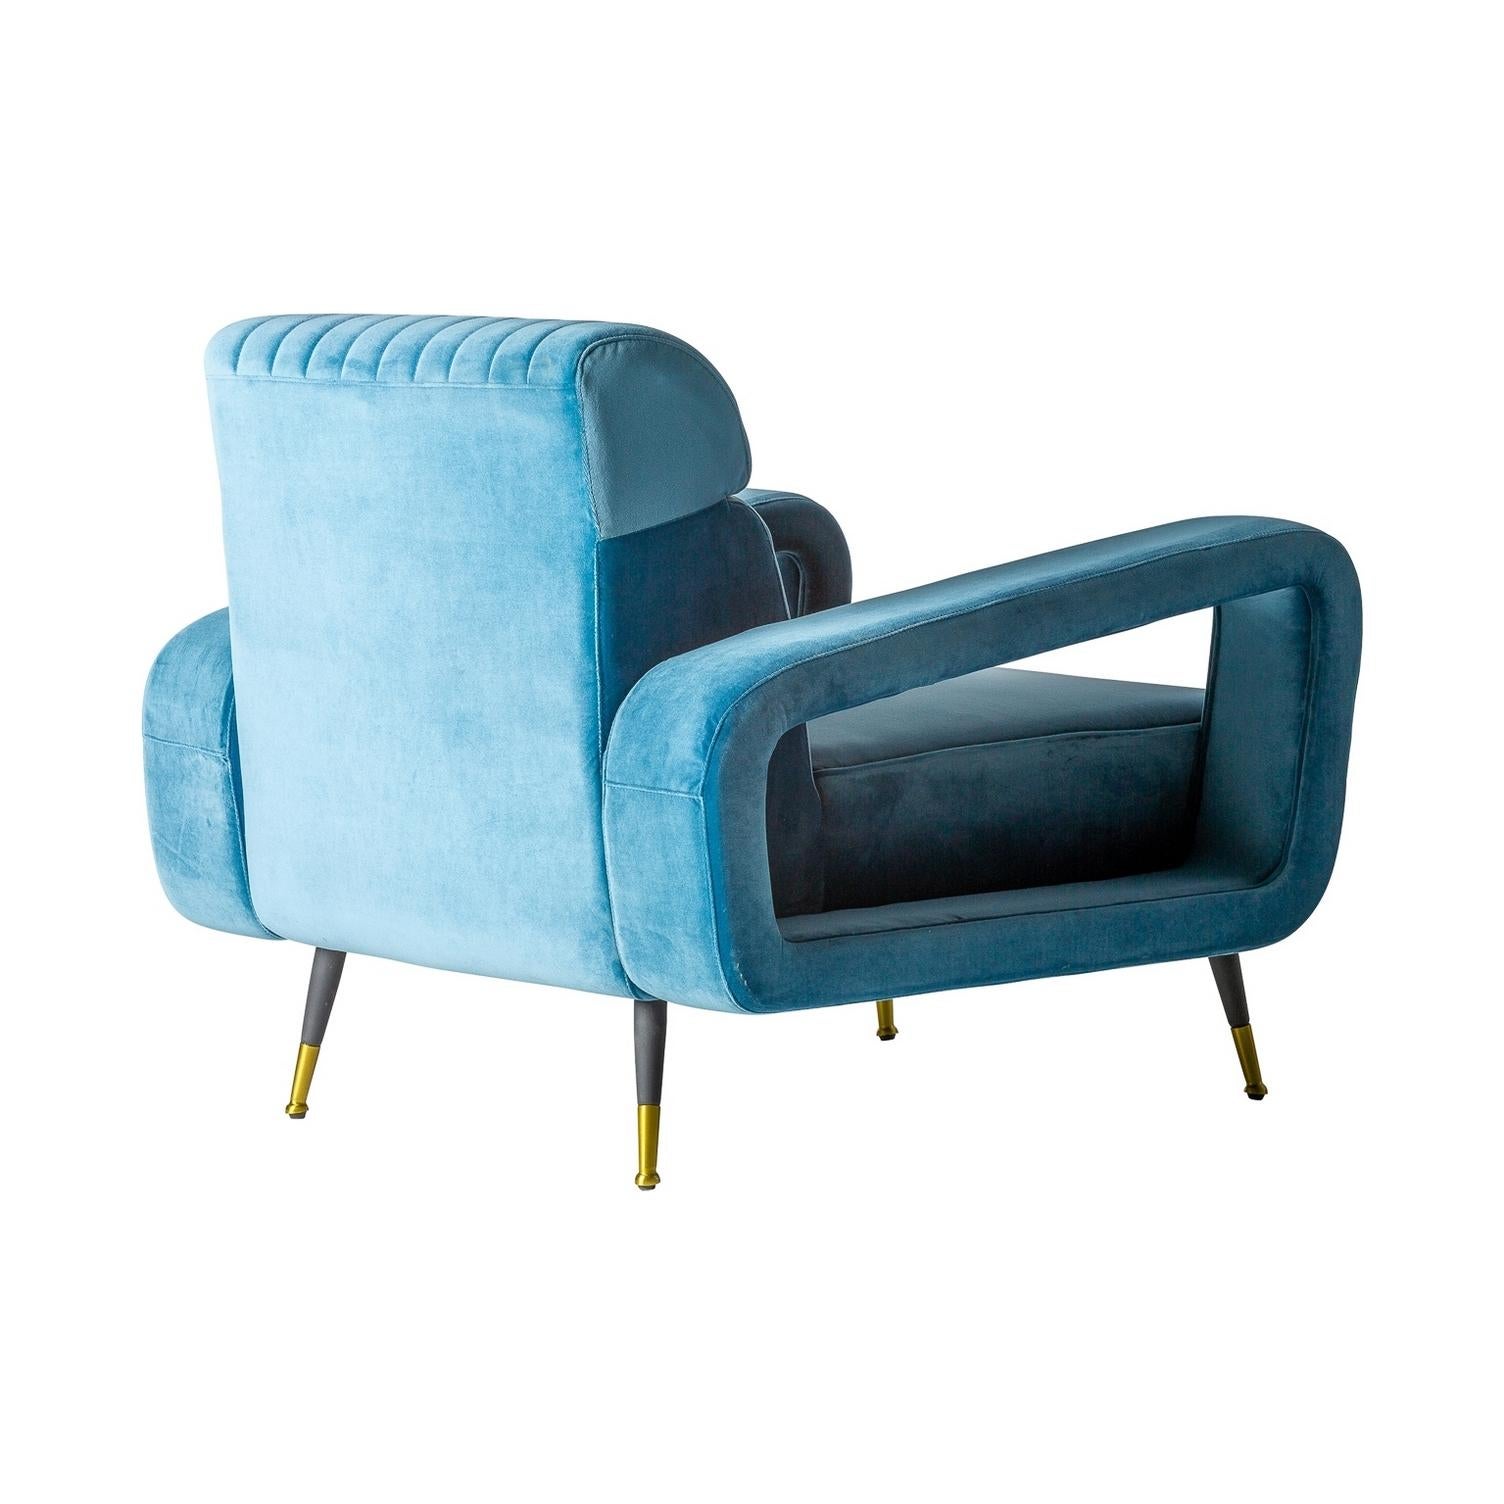 1950s design and vintage style blue velvet and black metal feet with gilded finishes comfy armchair.